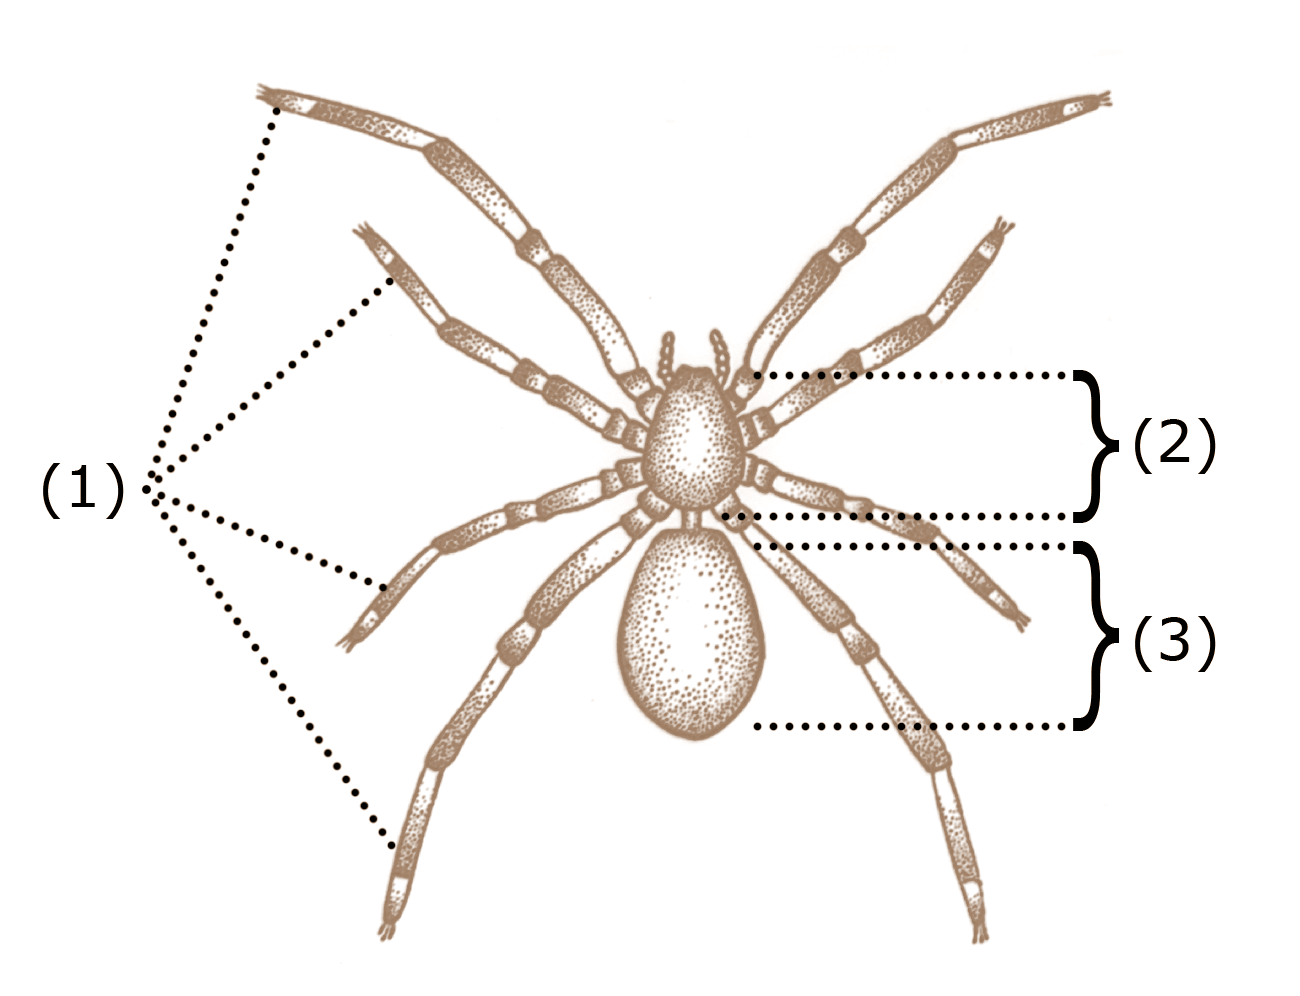 What are the ancestral limbs of a spider?